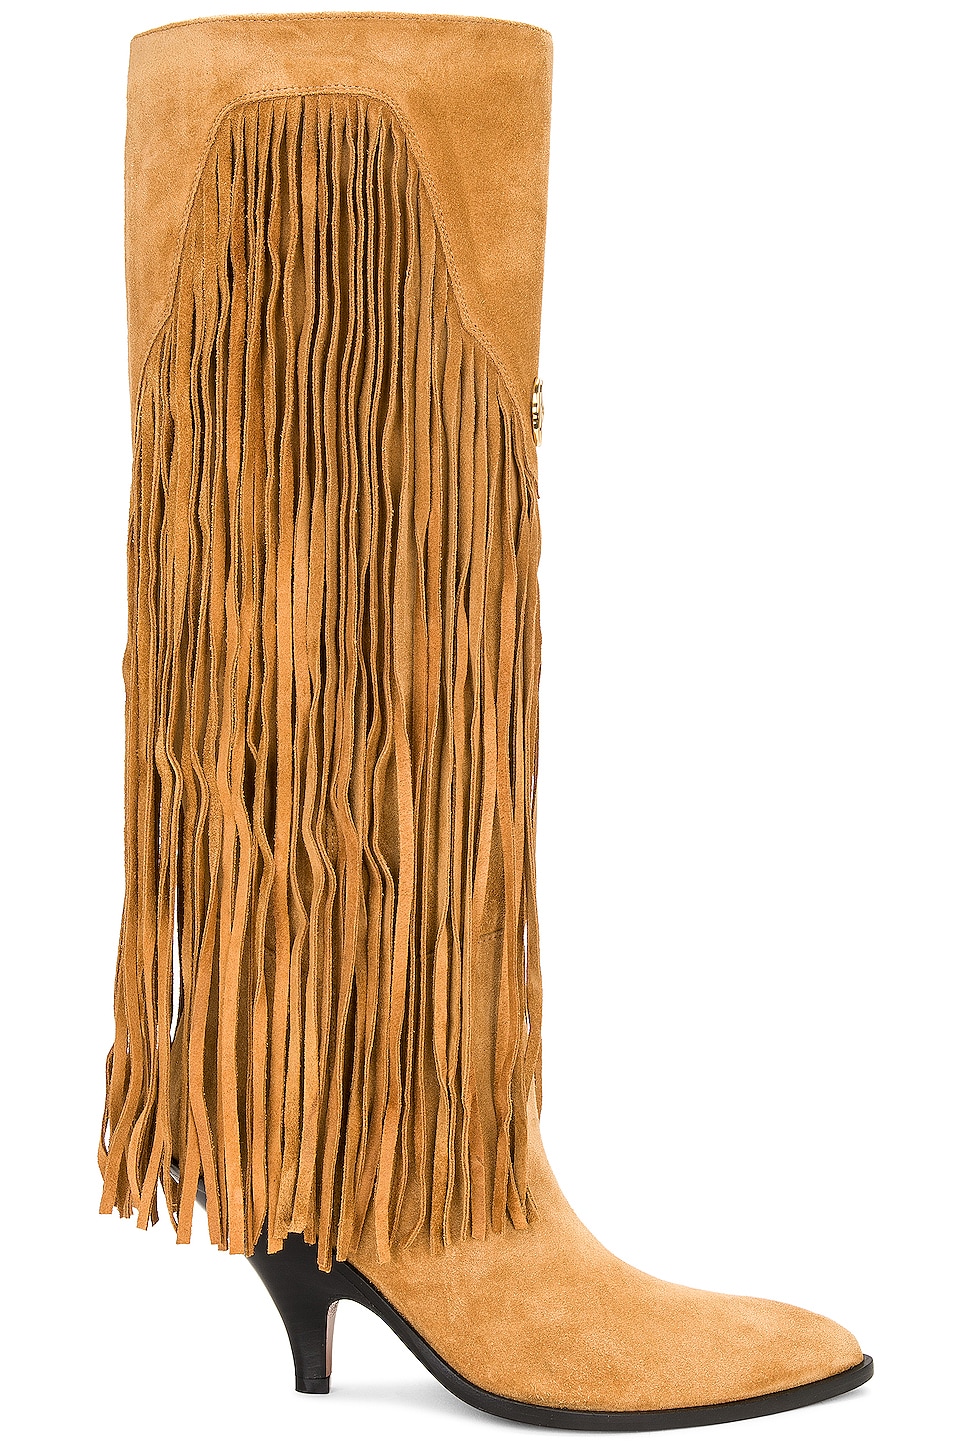 Lilac Fringe Boot in Tan